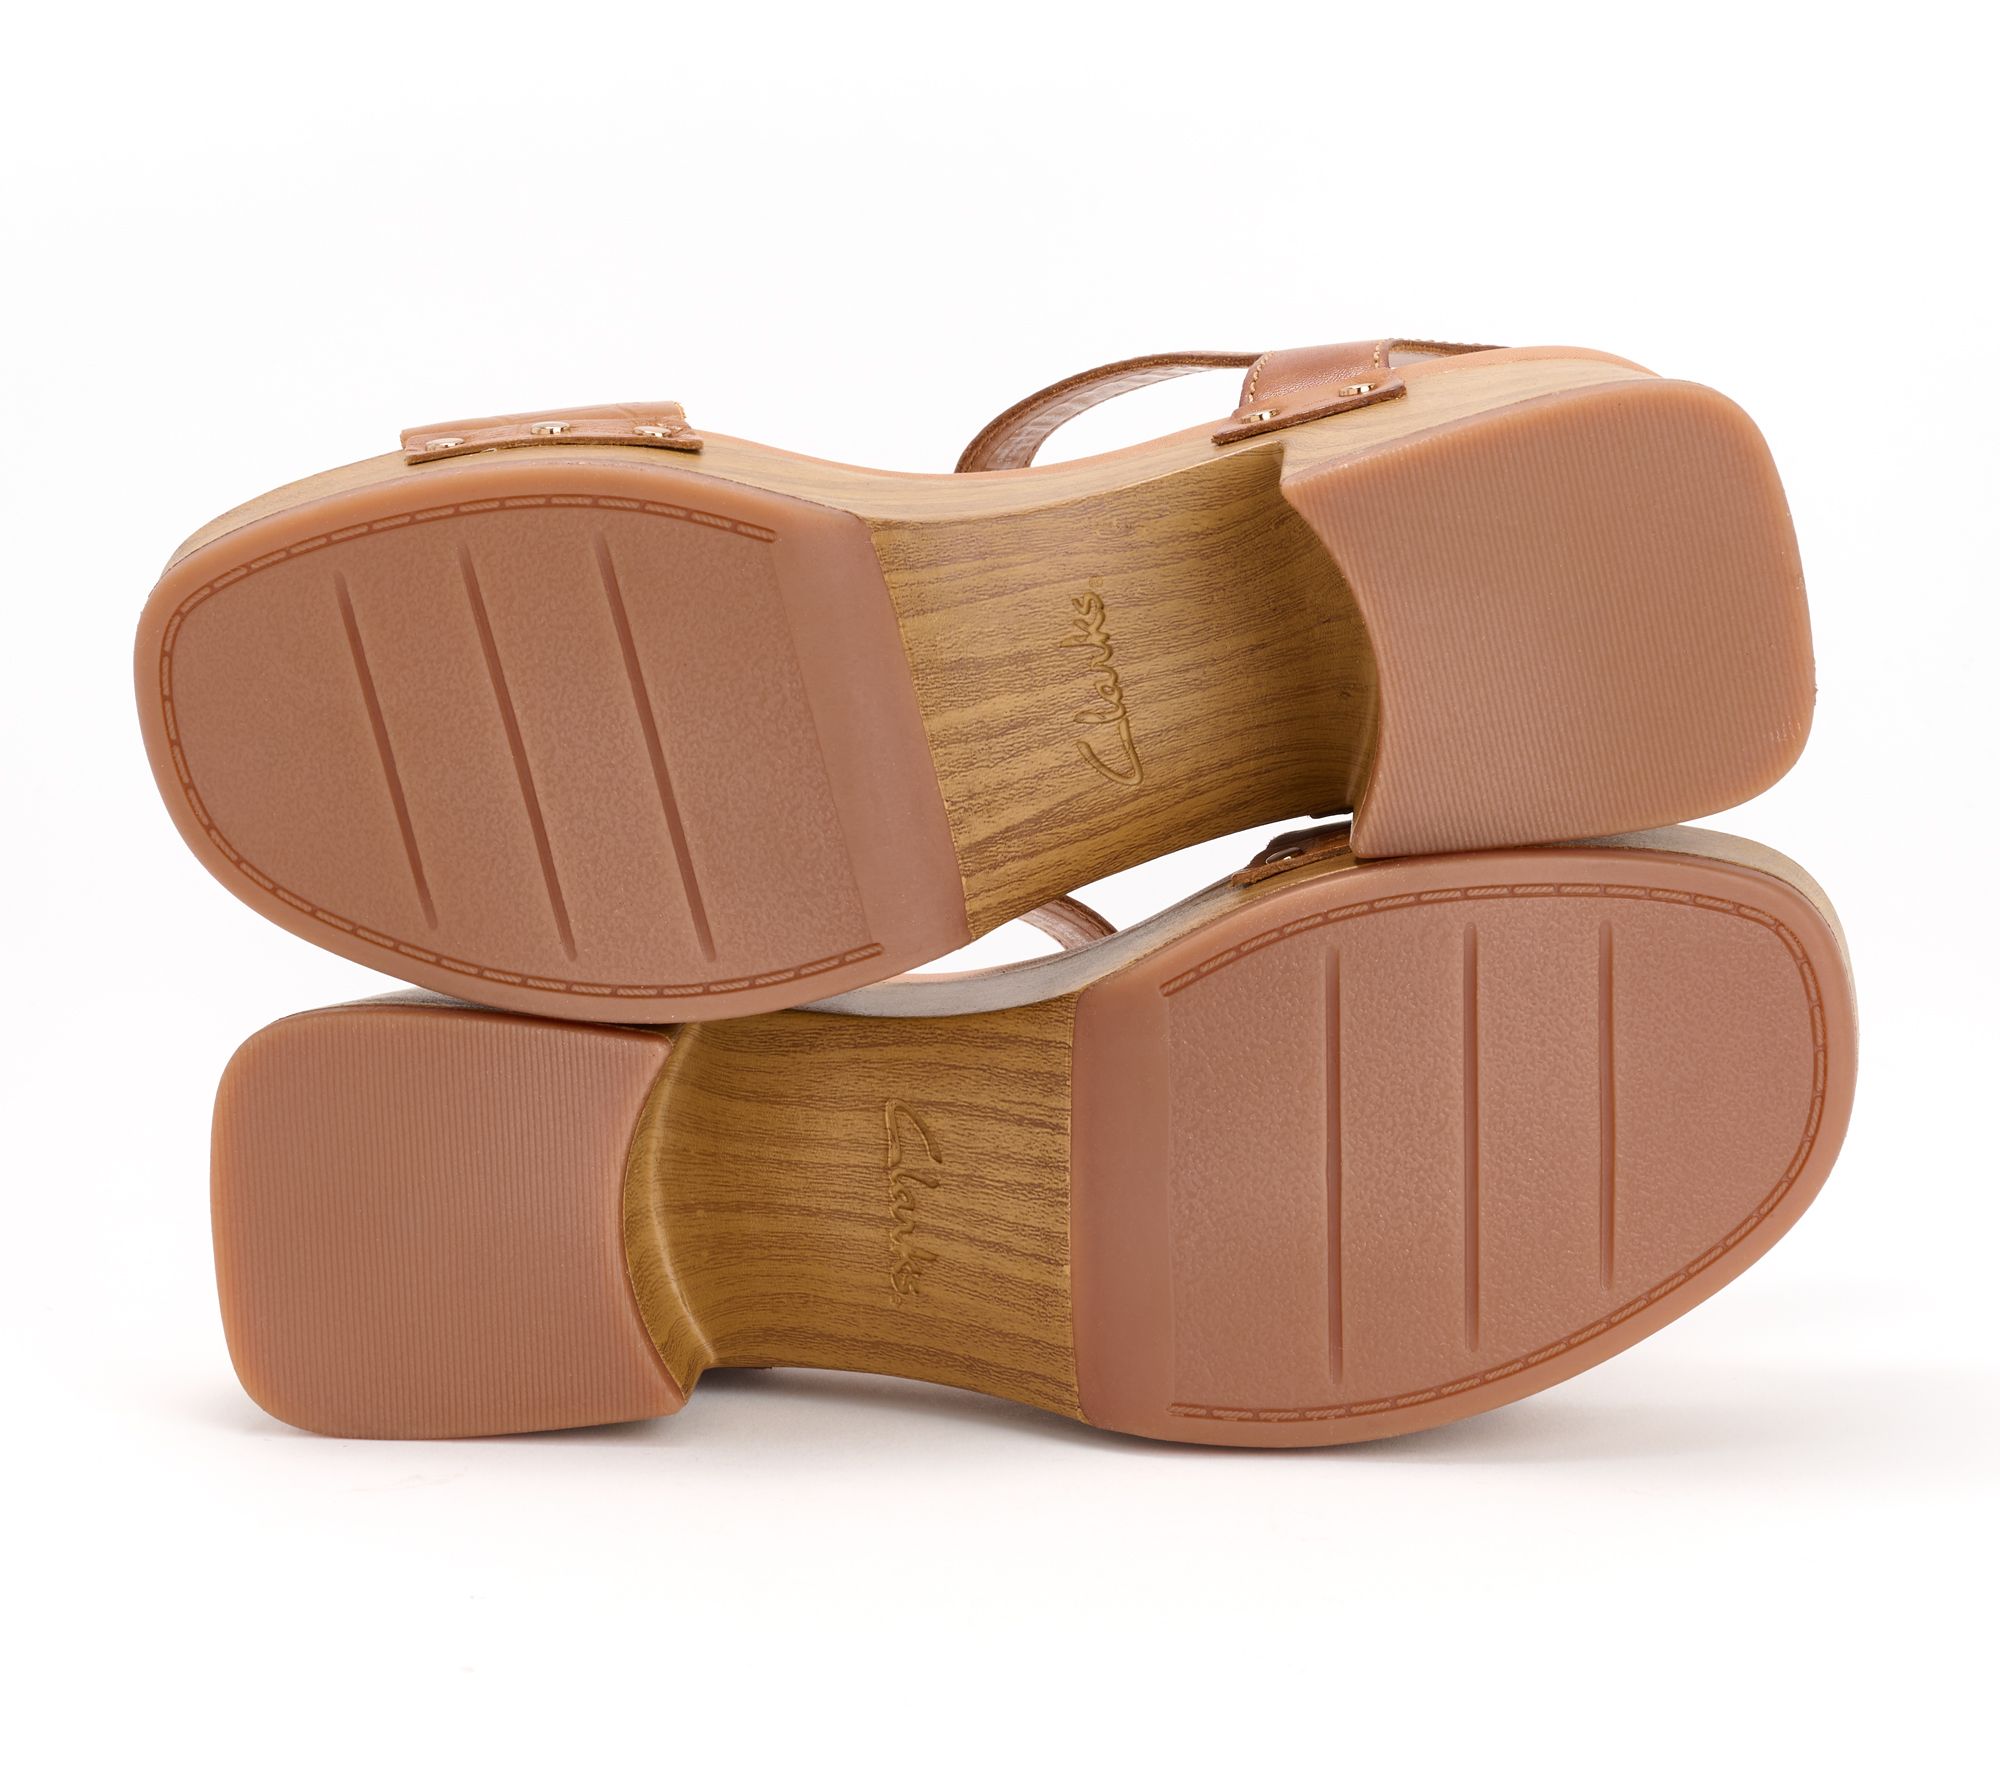 Clarks Signature Leather Heeled Sandals - Sivanne Bay